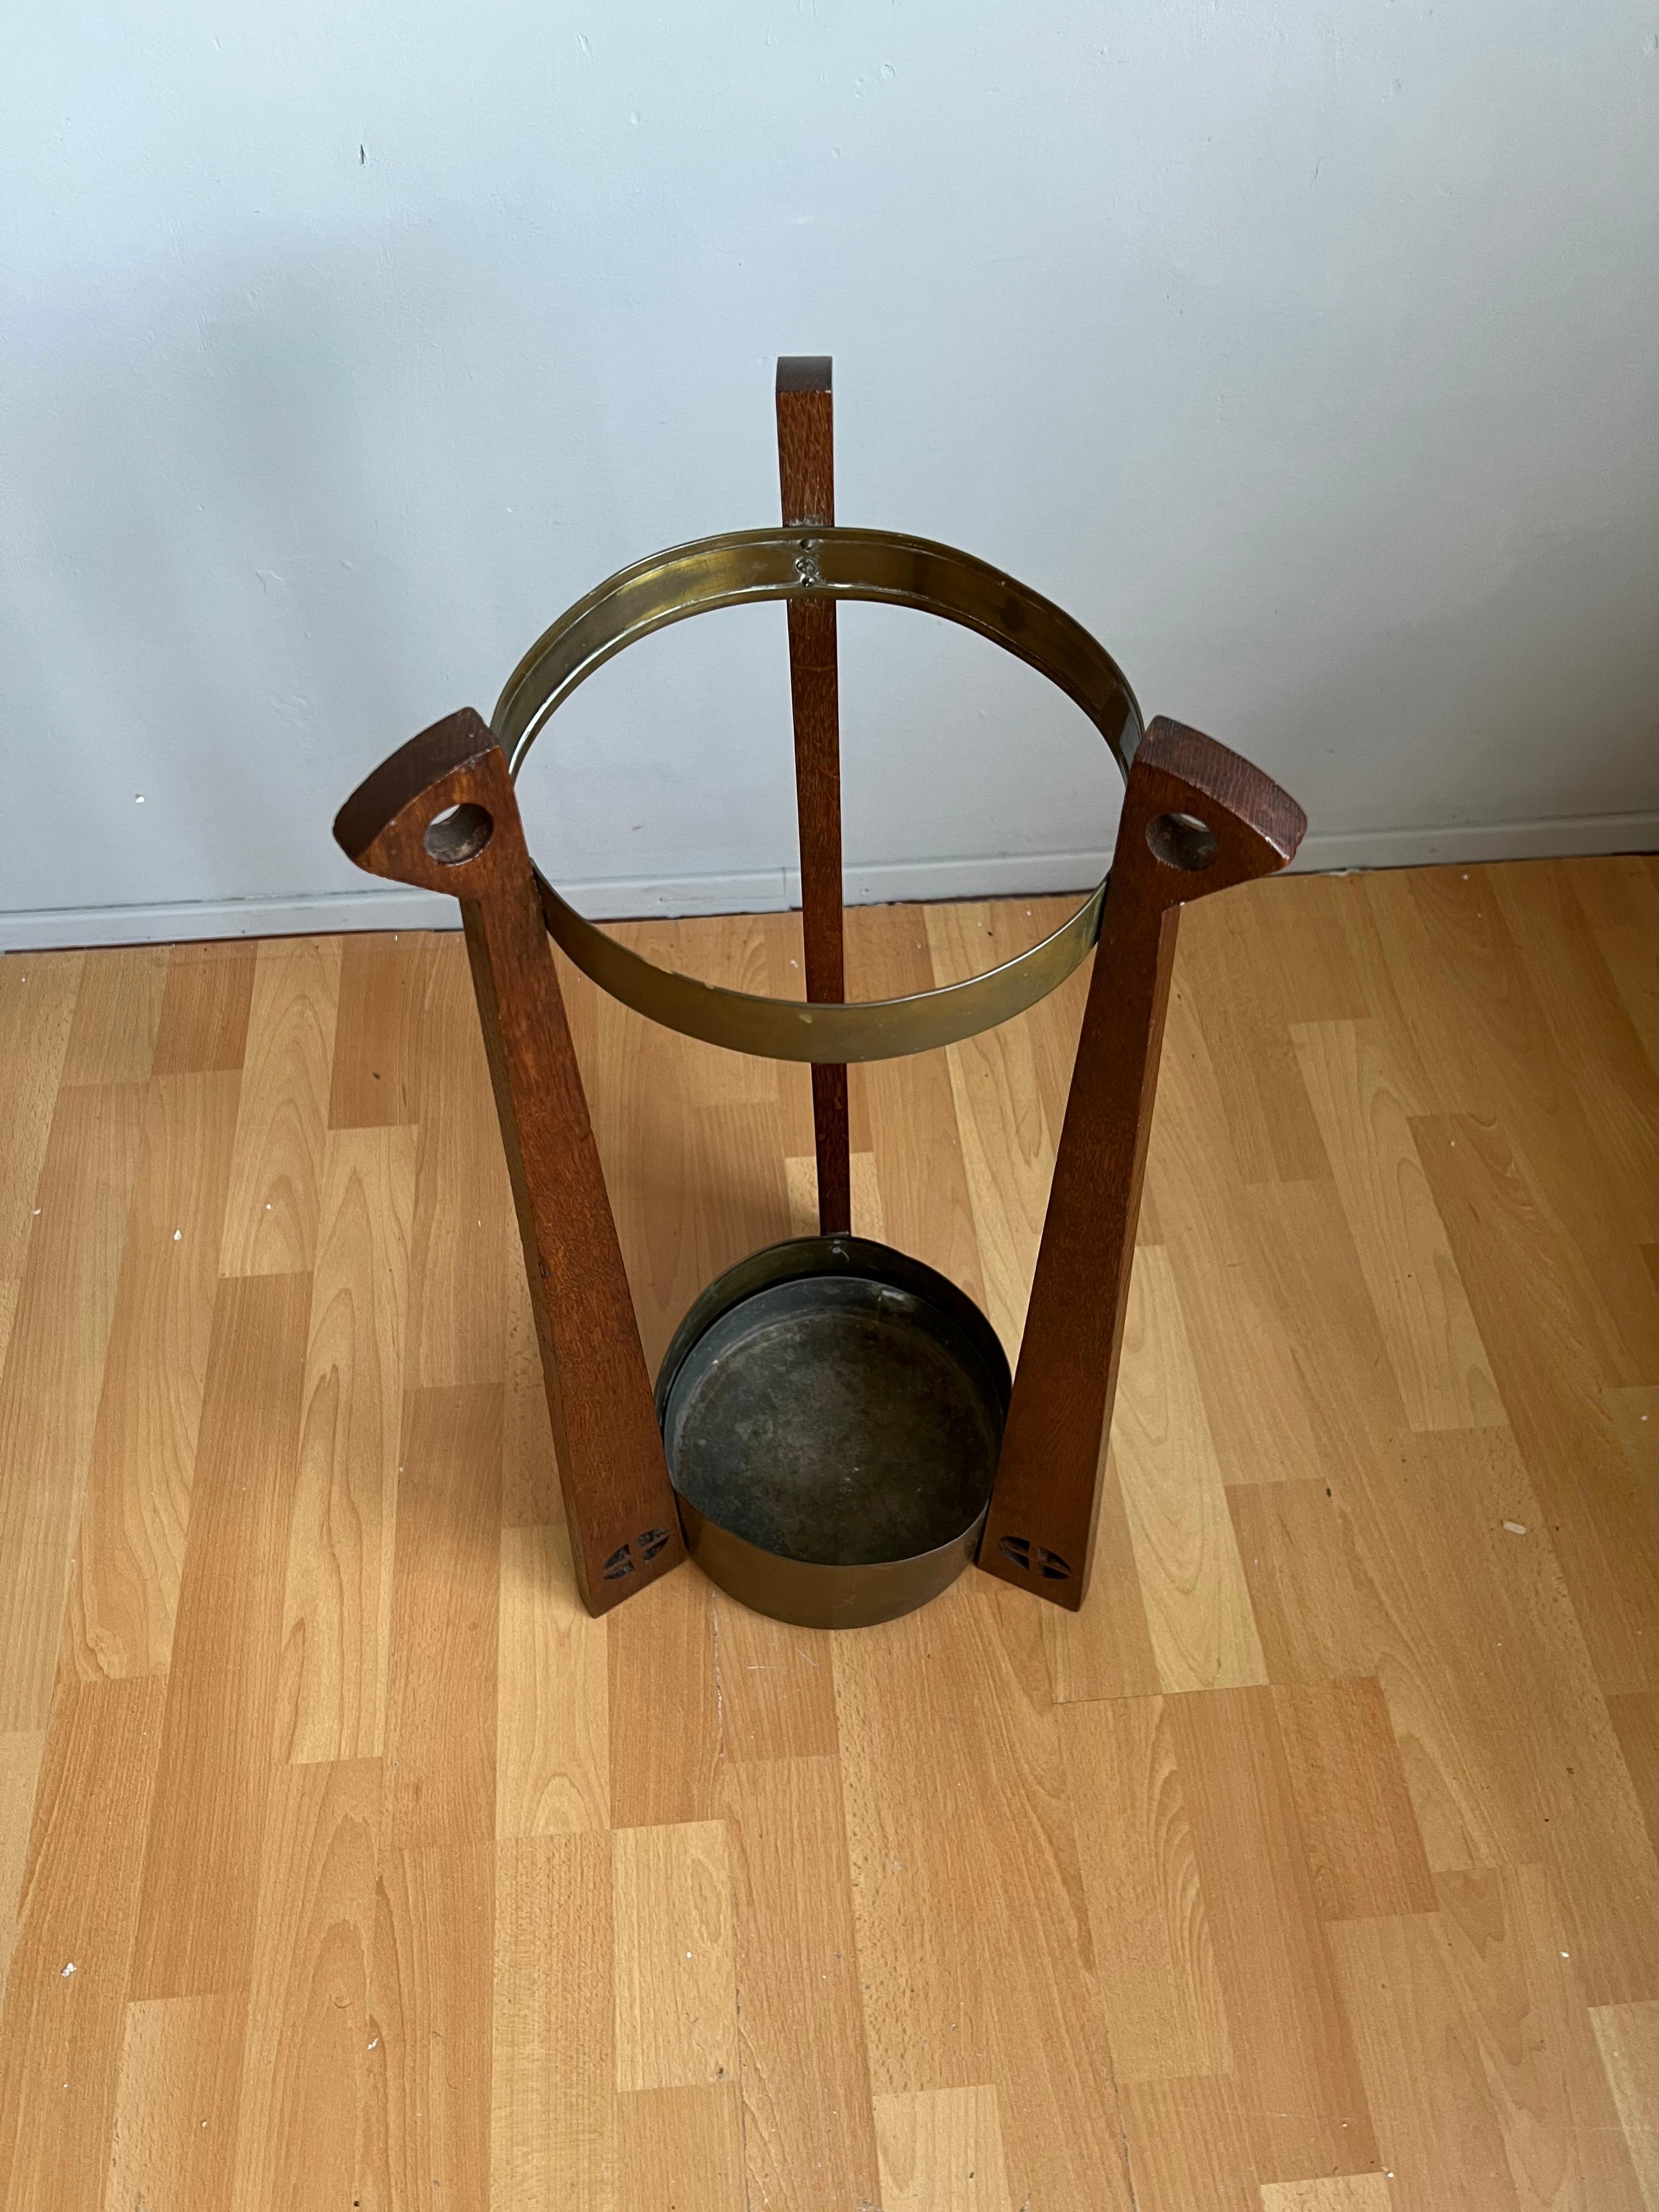 Rare and beautiful quality Arts & Crafts stand, designed by Gustave Serrurier-Bovy (1858-1910).

Looking for a stylish and practical antique to upgrade your entrance experience? This entirely handcrafted, early 1900s hall stand is a perfect example